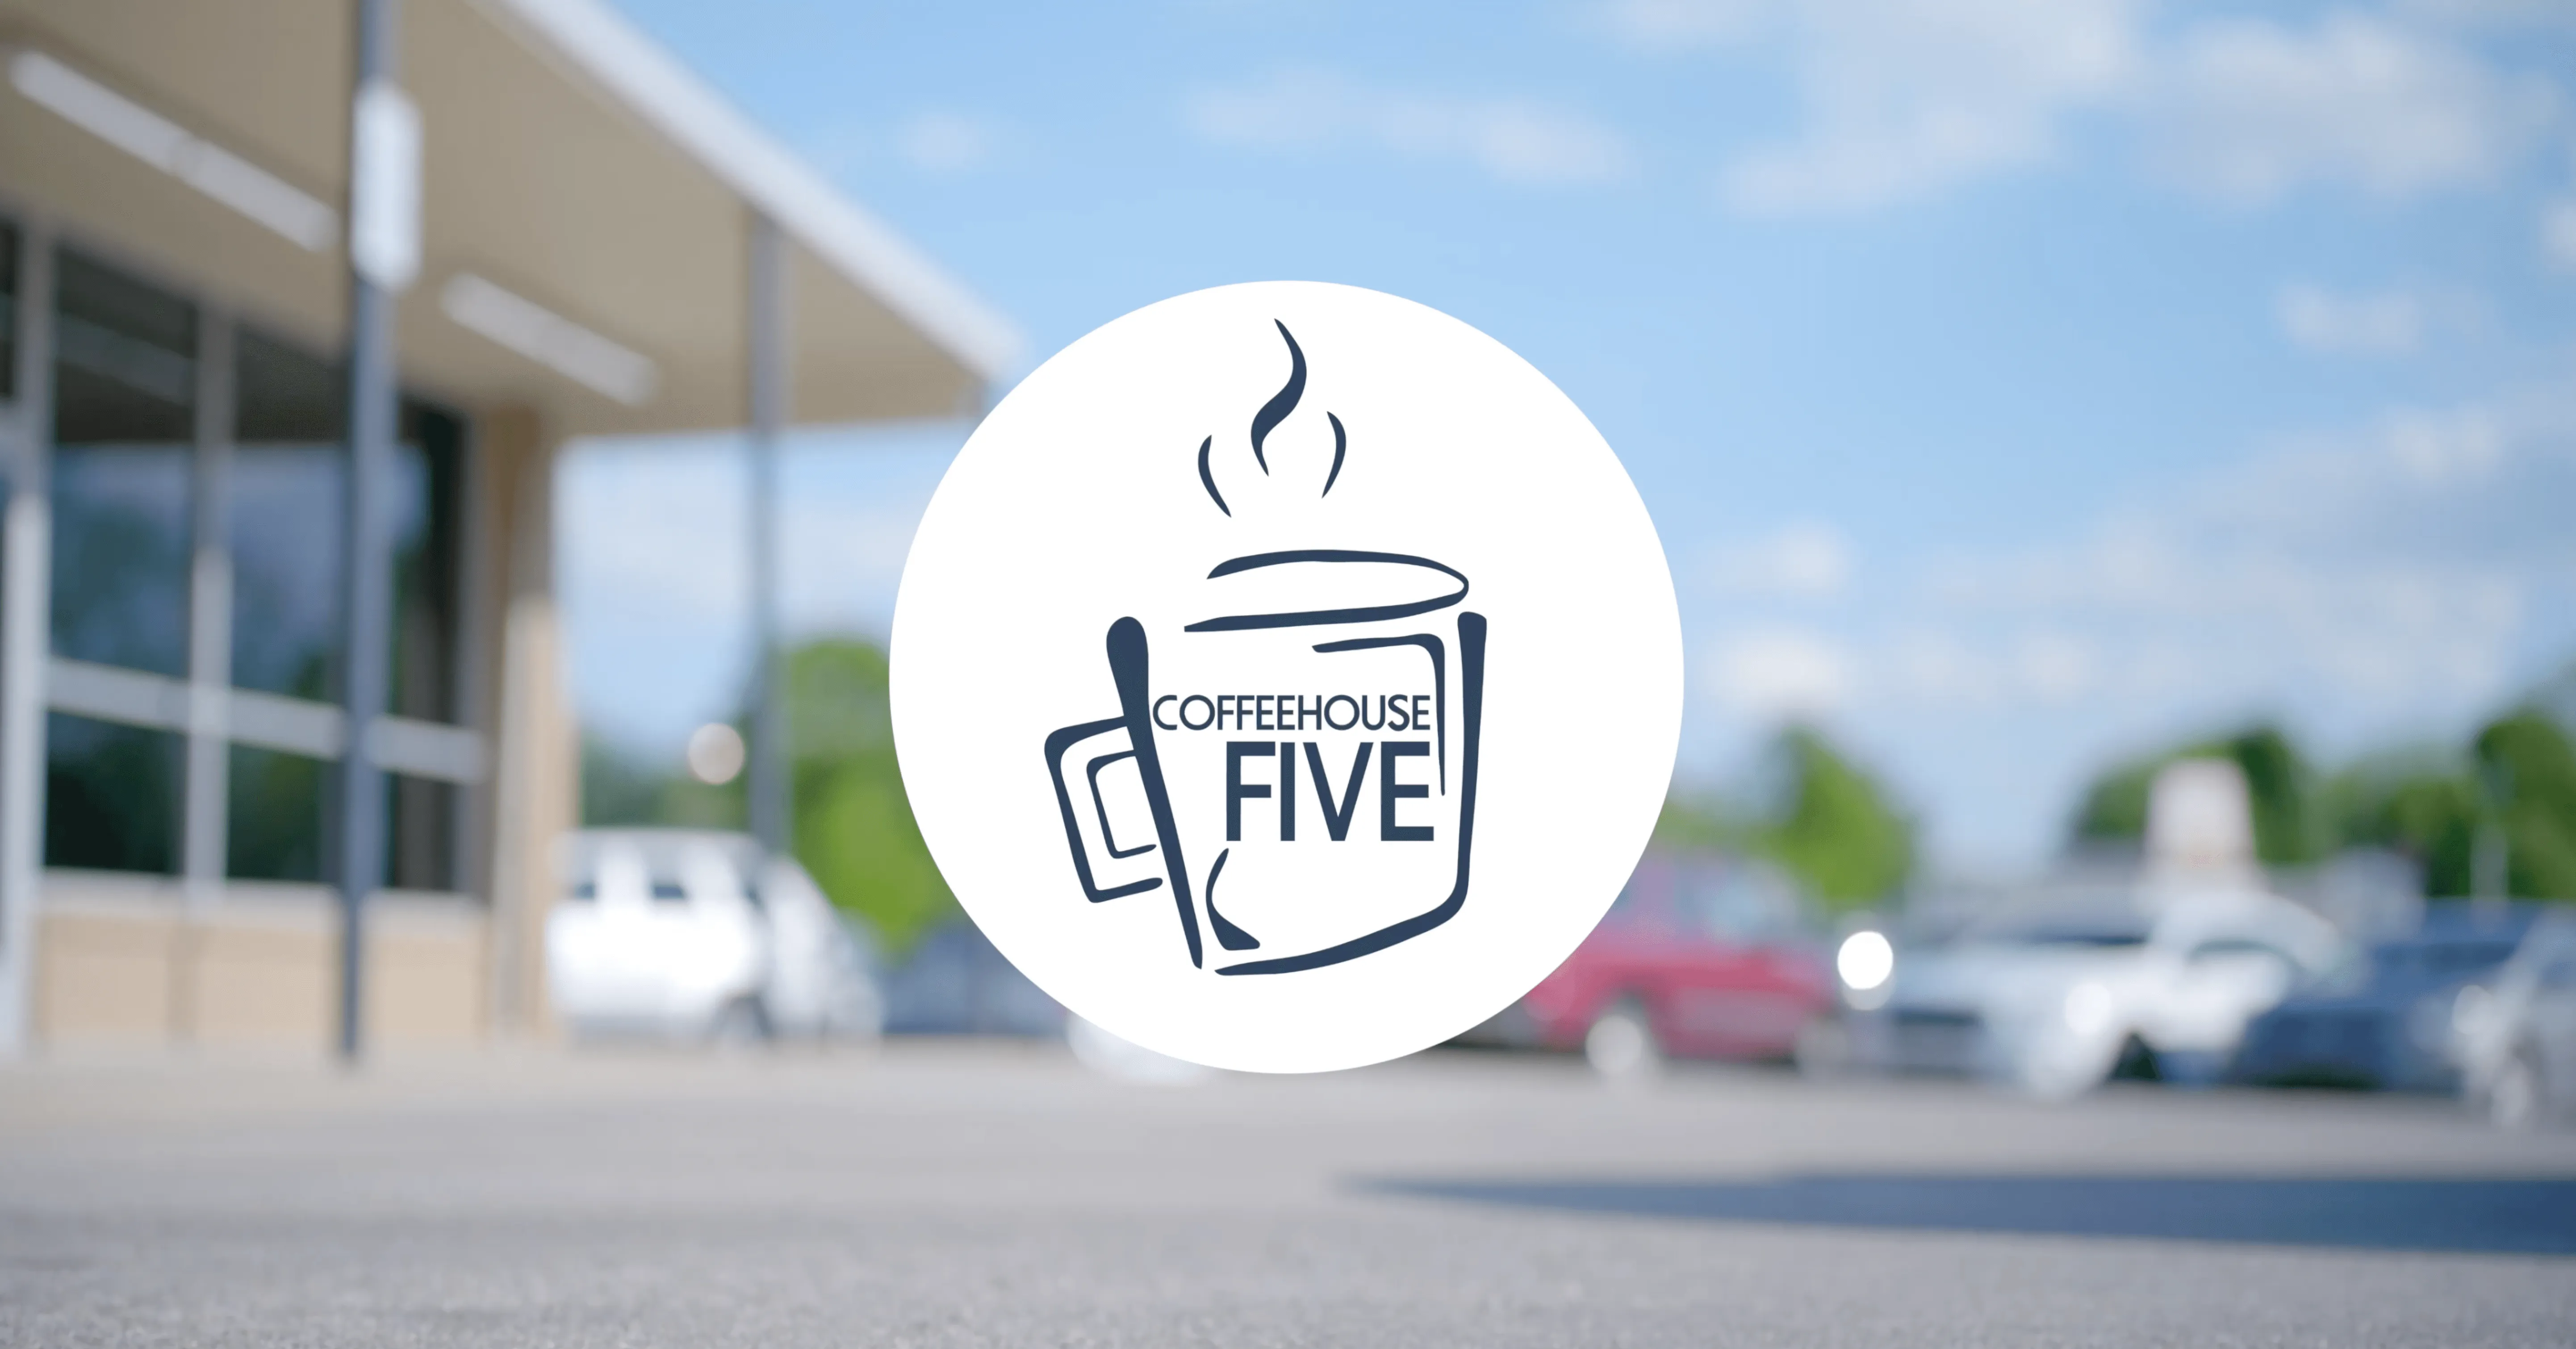 Logo of Coffeehouse Five with a stylized coffee cup design superimposed over a blurry background featuring a building and parked cars.